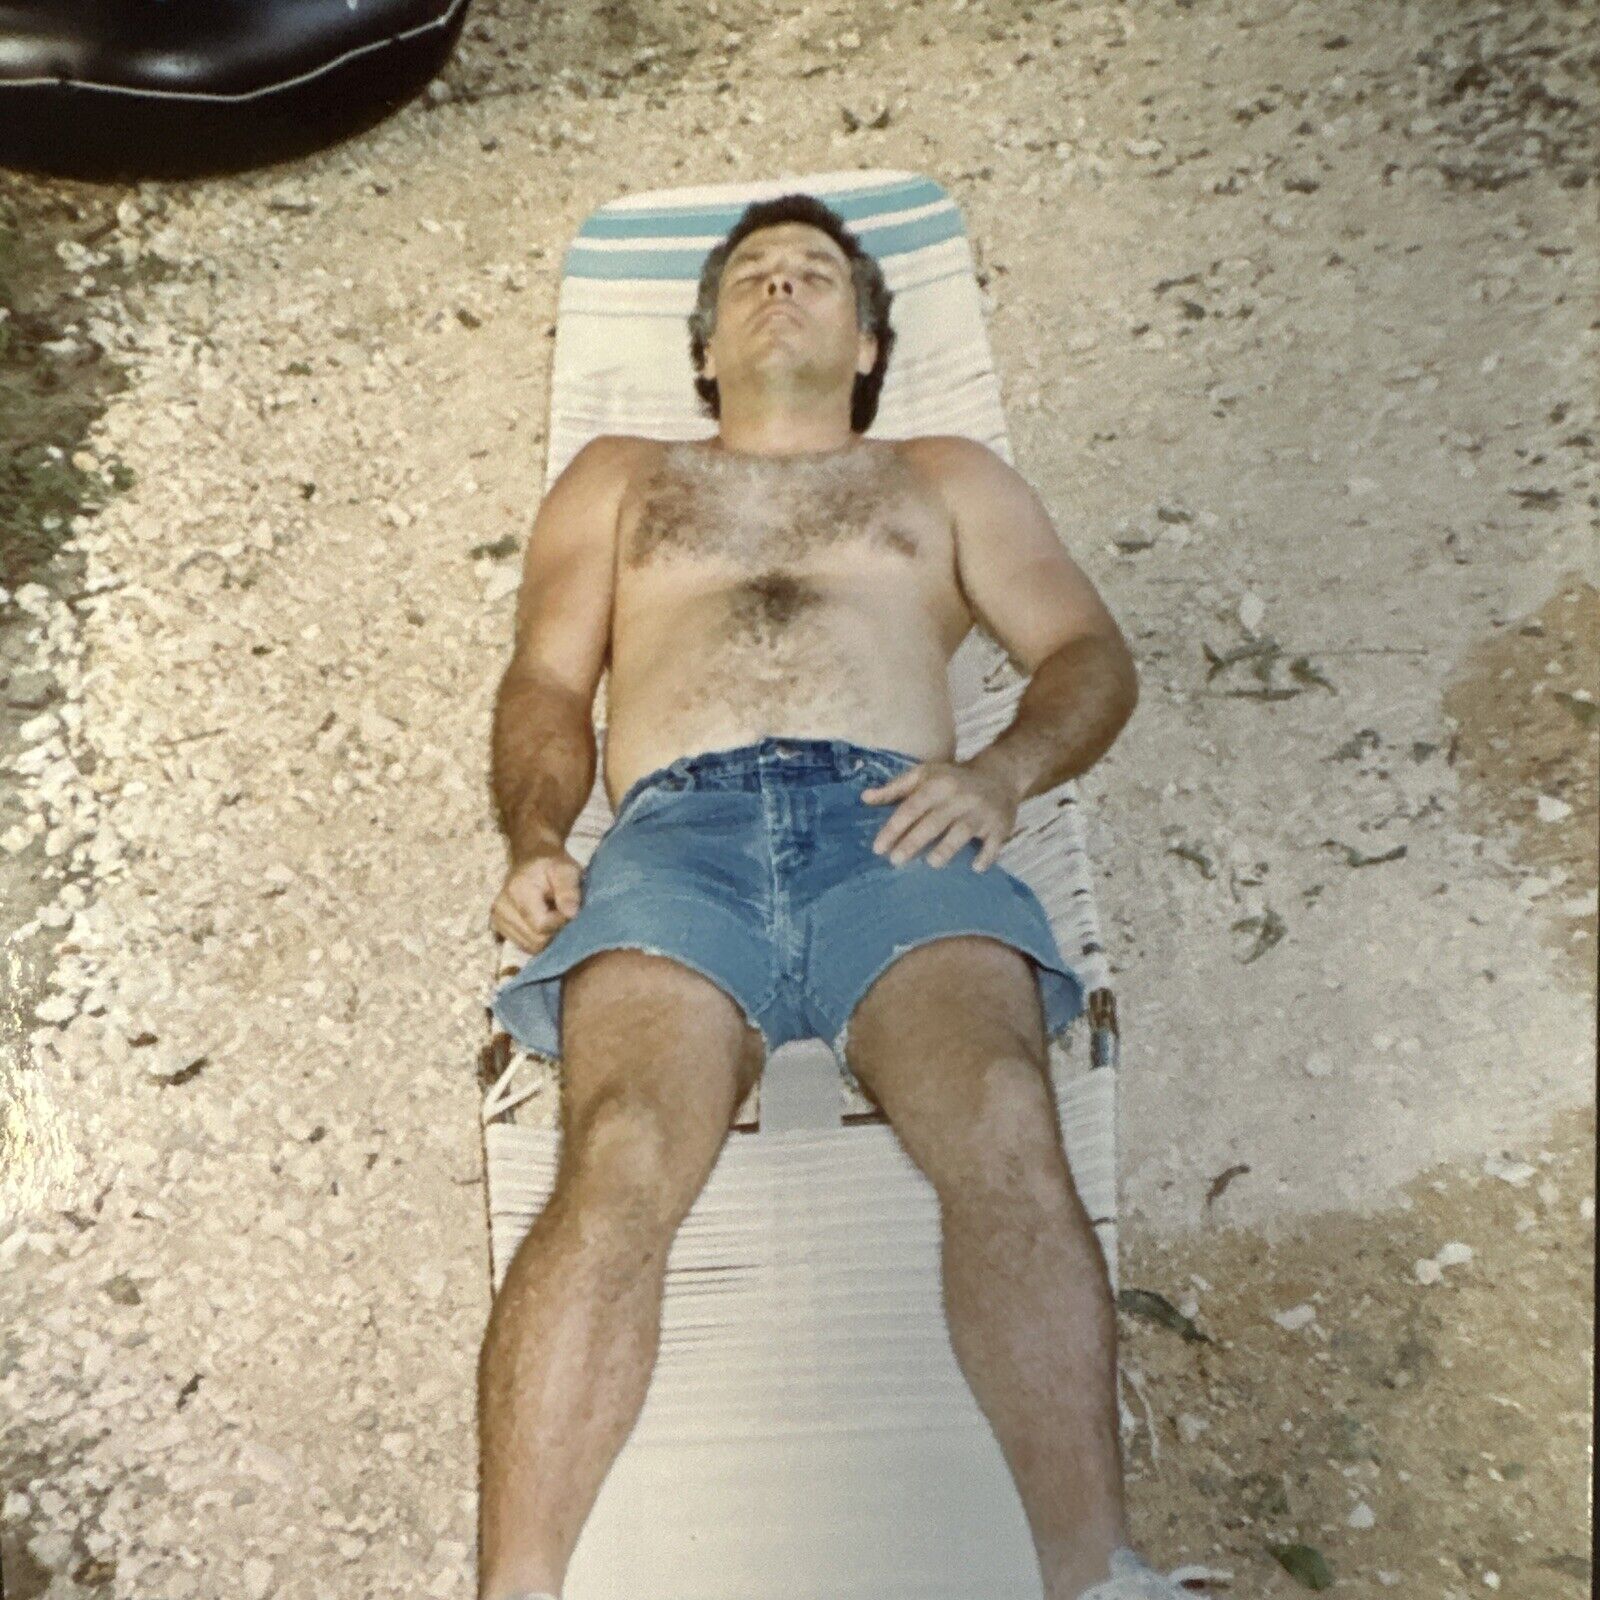 Shirtless Hairy Silver Fox Man Sleeping Gay Interest, REAL VINTAGE COLOR PHOTO